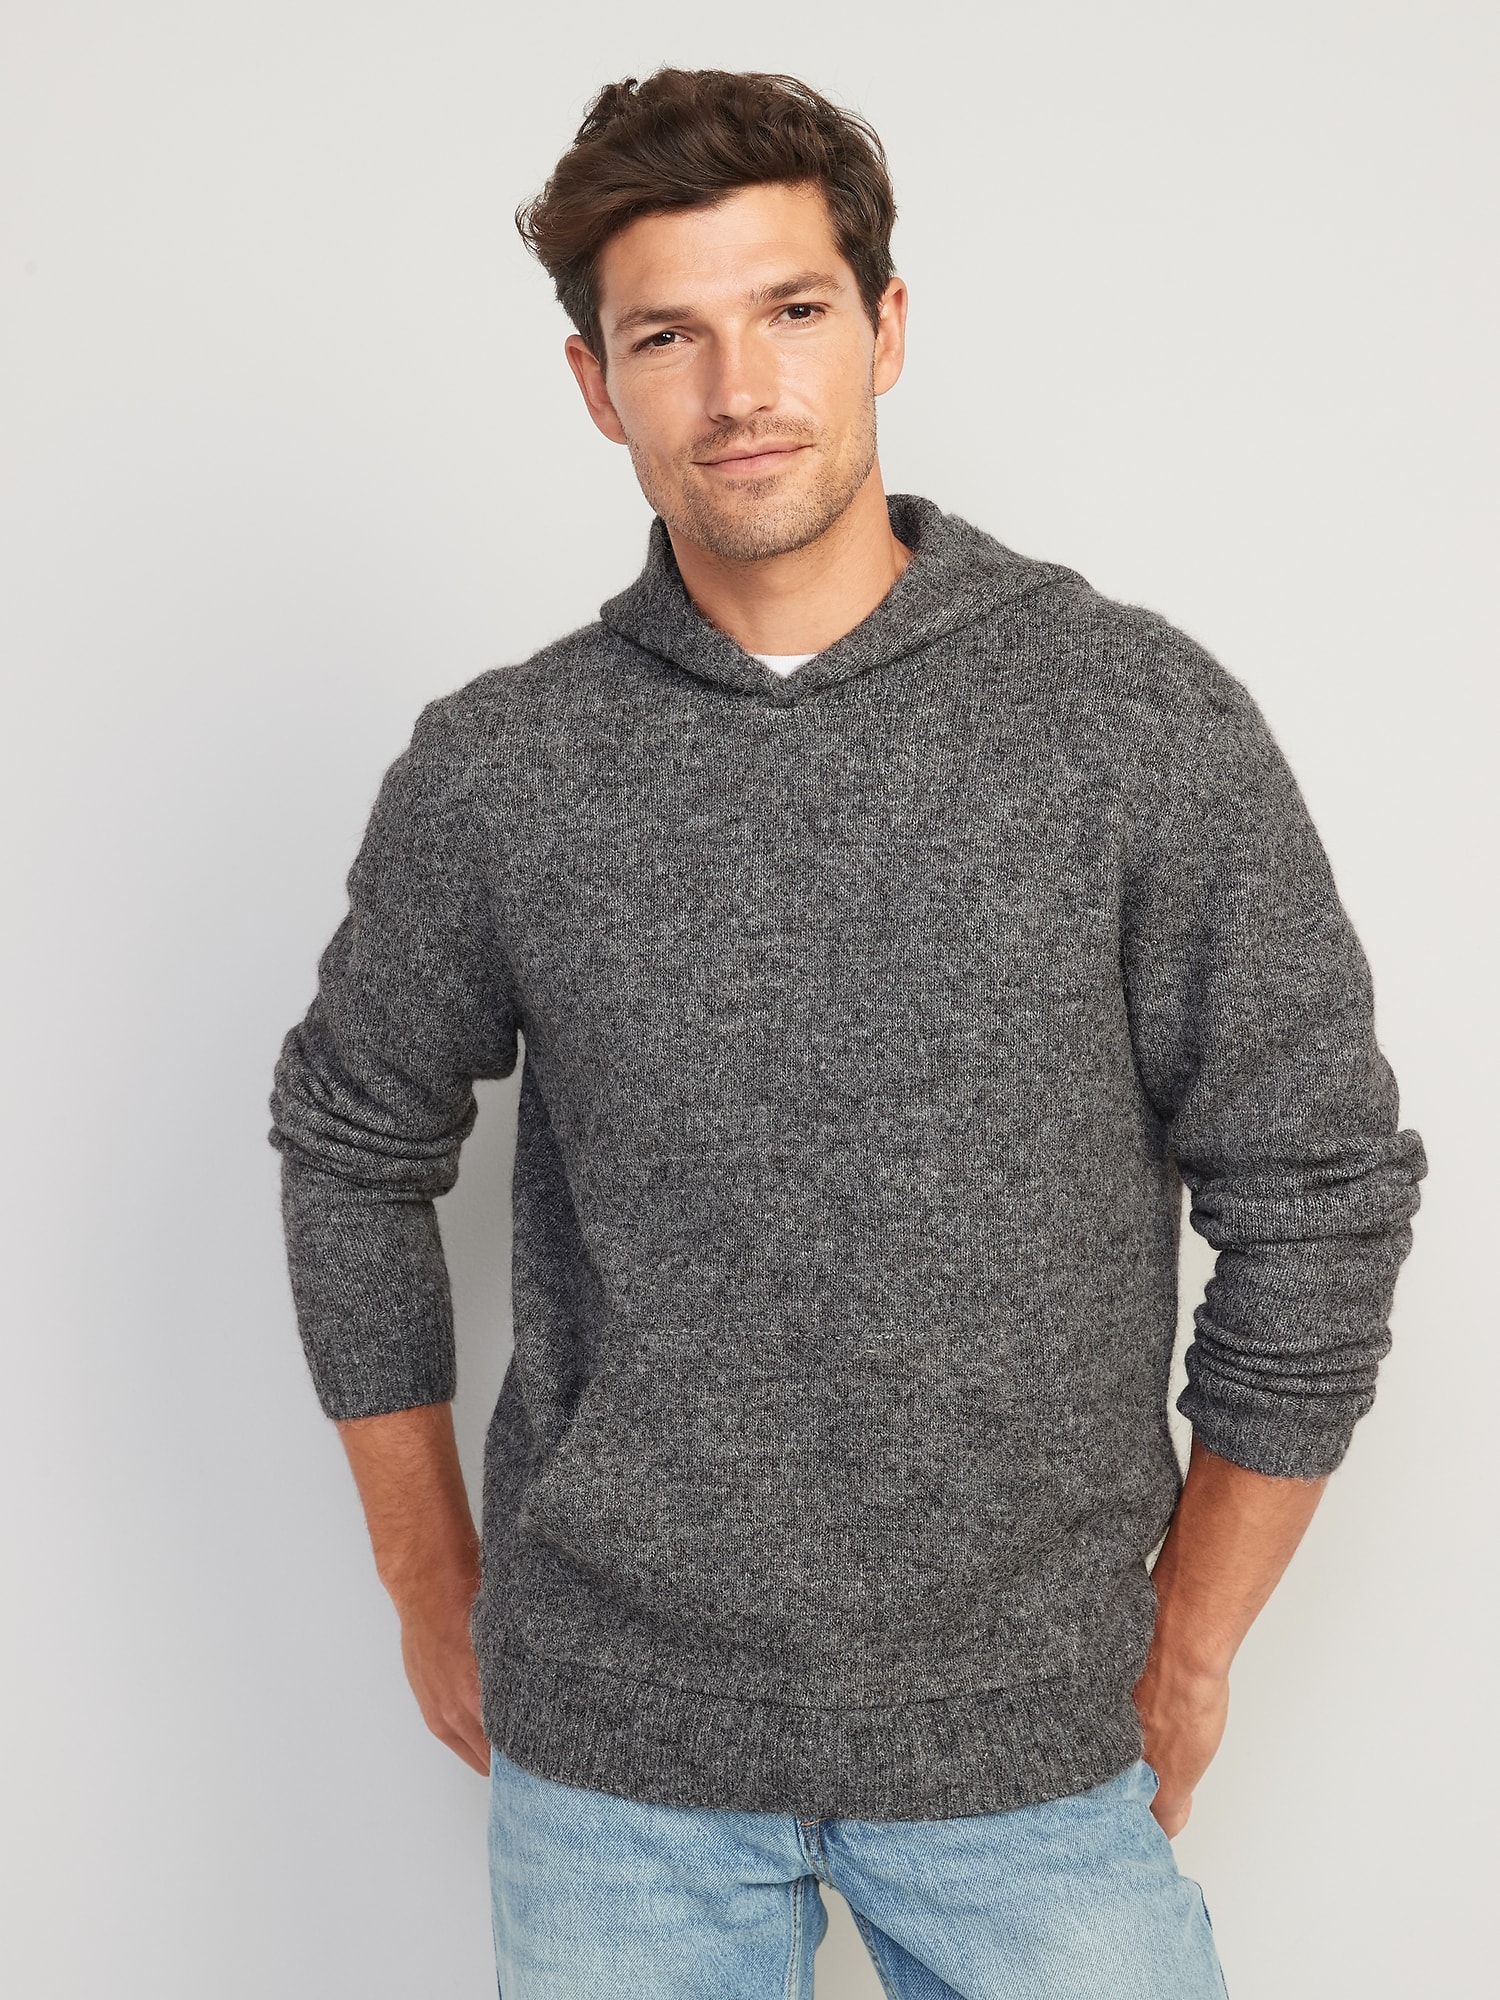 Navy Hoodie Sweater Pullover Loose-Fit | Old for Men